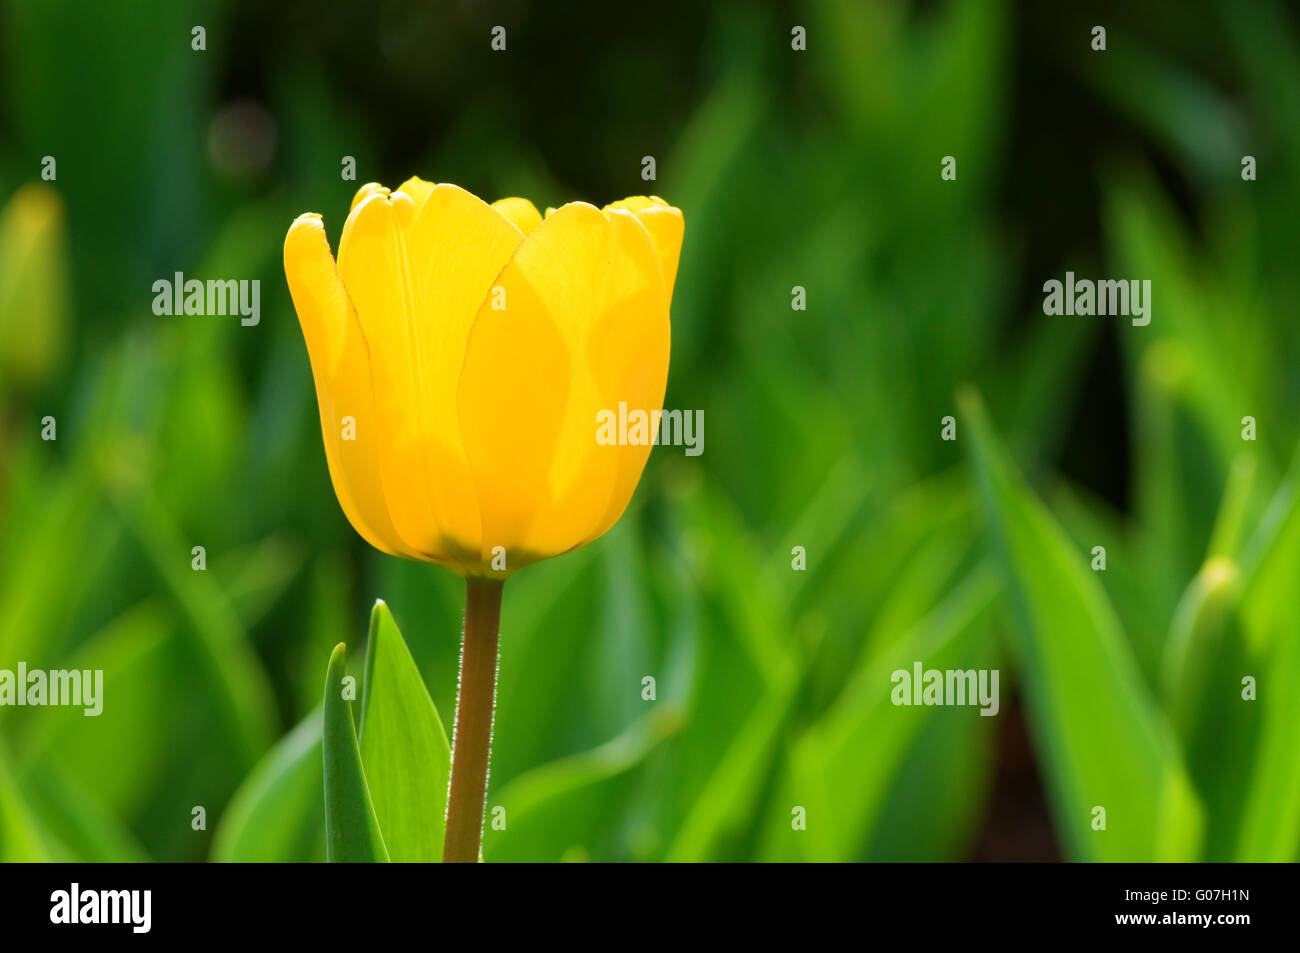 The close up view of a single yellow tulip over green background Stock Photo